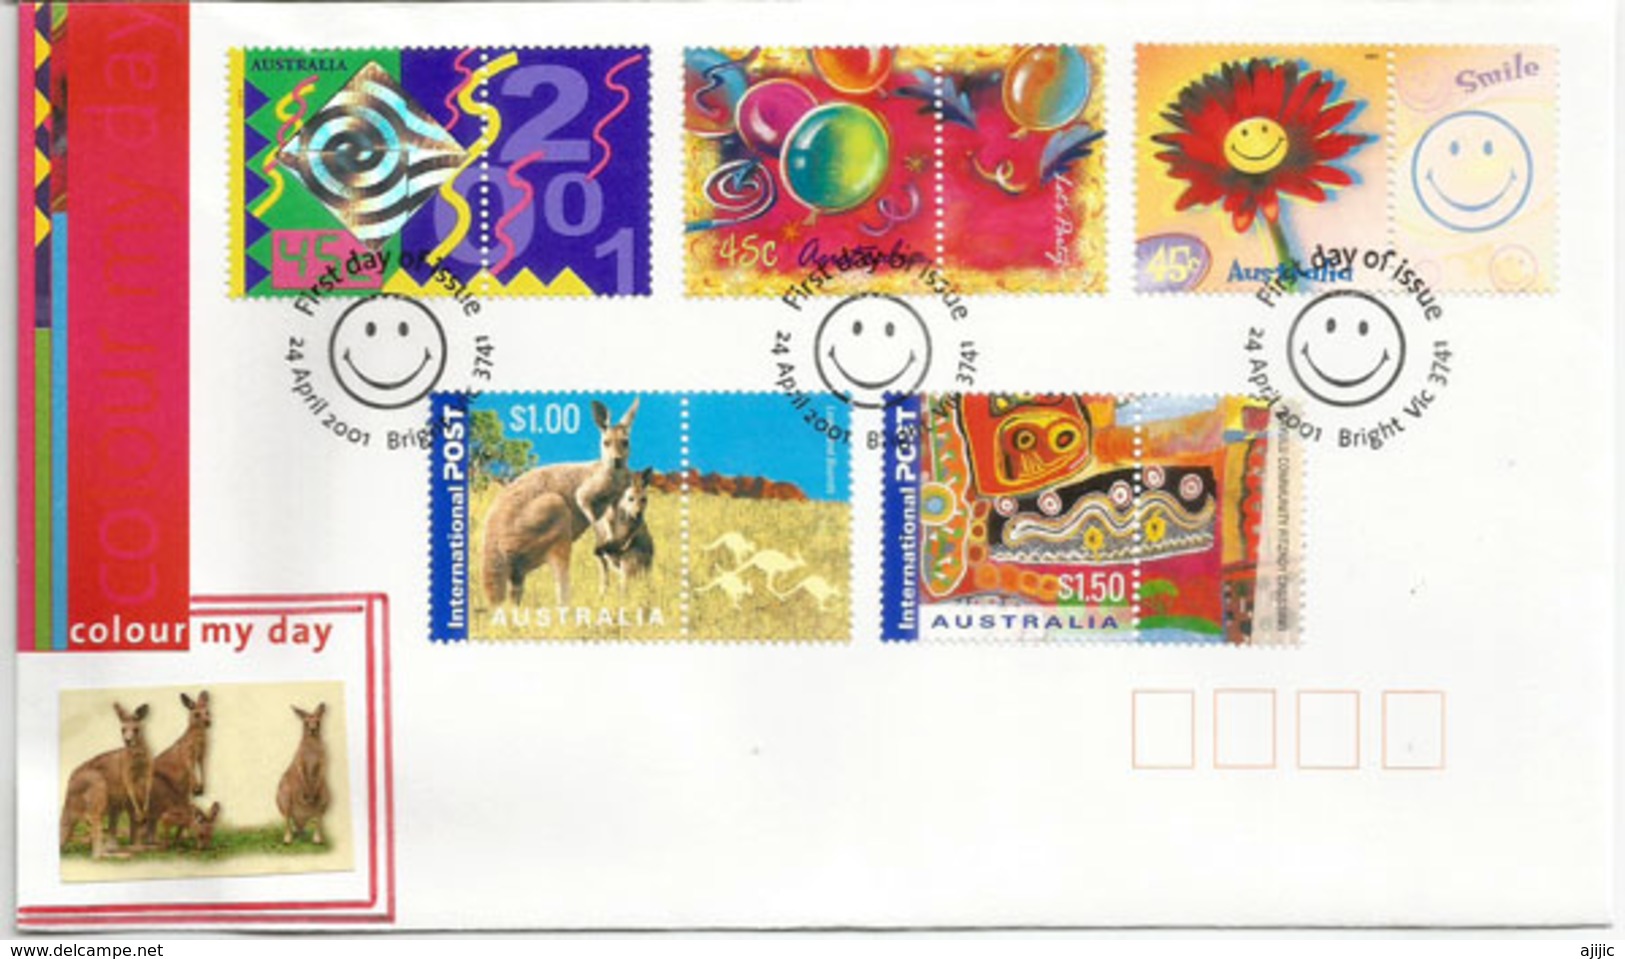 AUSTRALIA: Hologramme Stamp & Colour My Day Stamps. FDC Bright.Victoria. 2001 (hautes Faciales) - Hologrammes